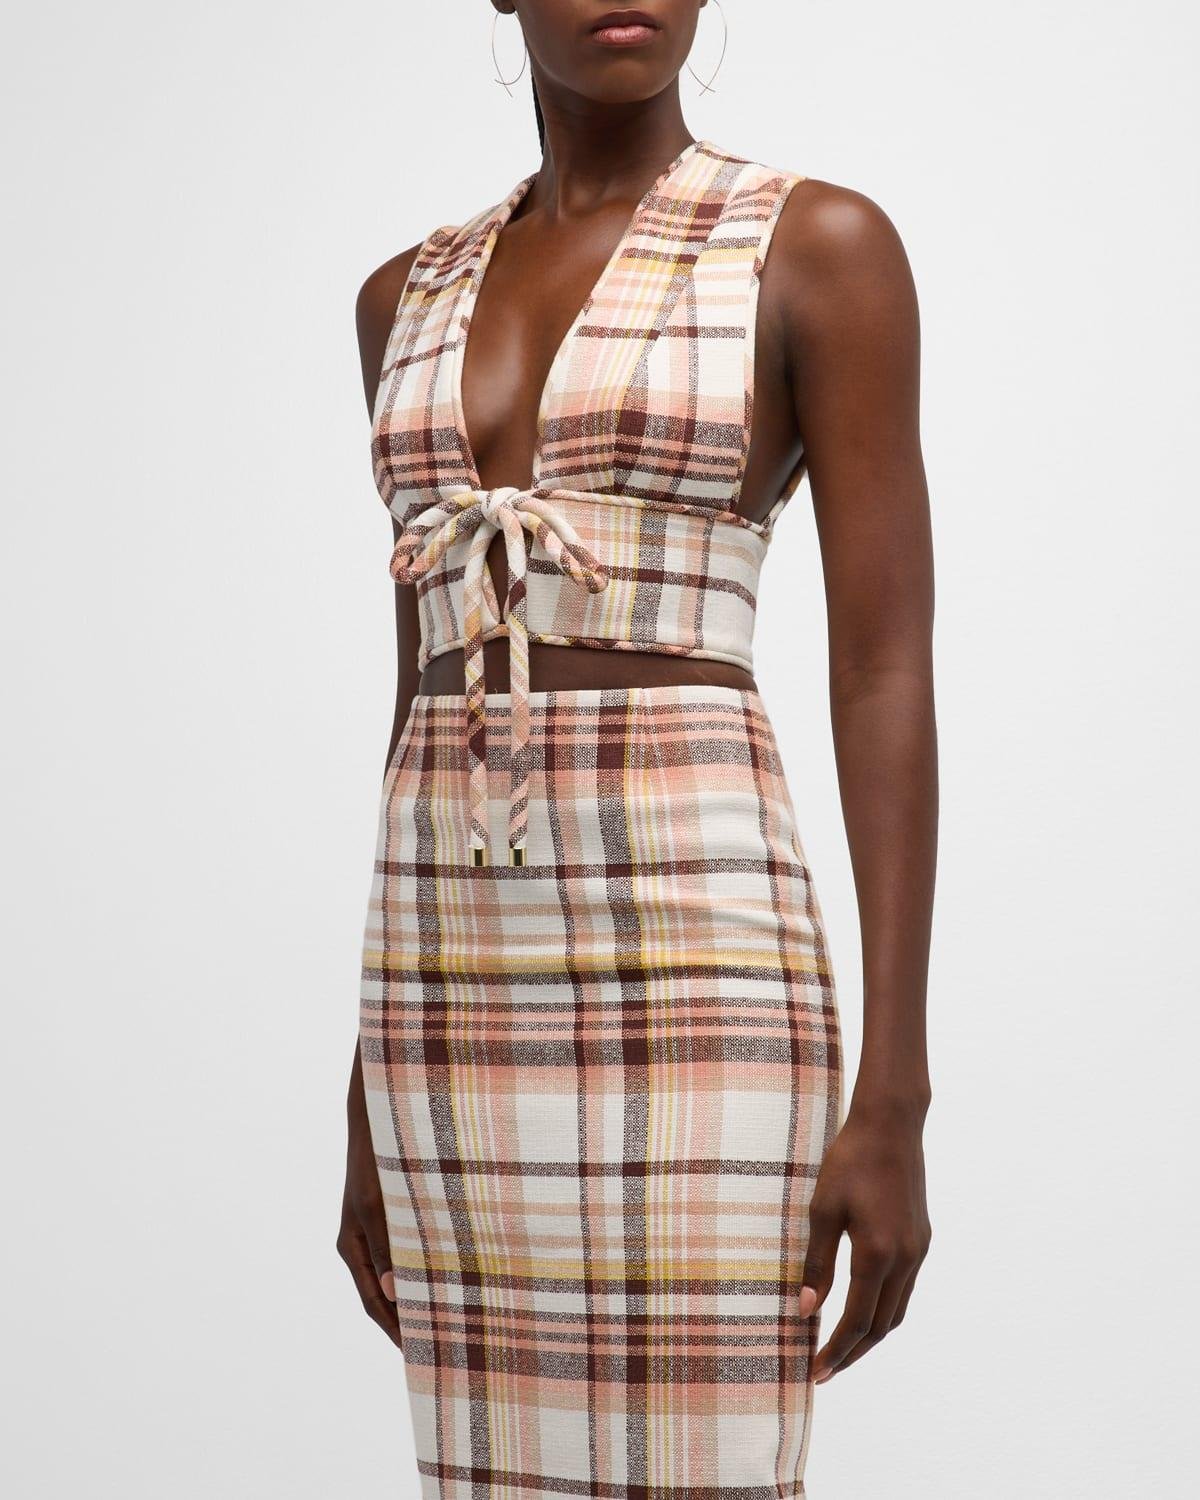 Matchmaker Check Bow-Front Bodice by ZIMMERMANN